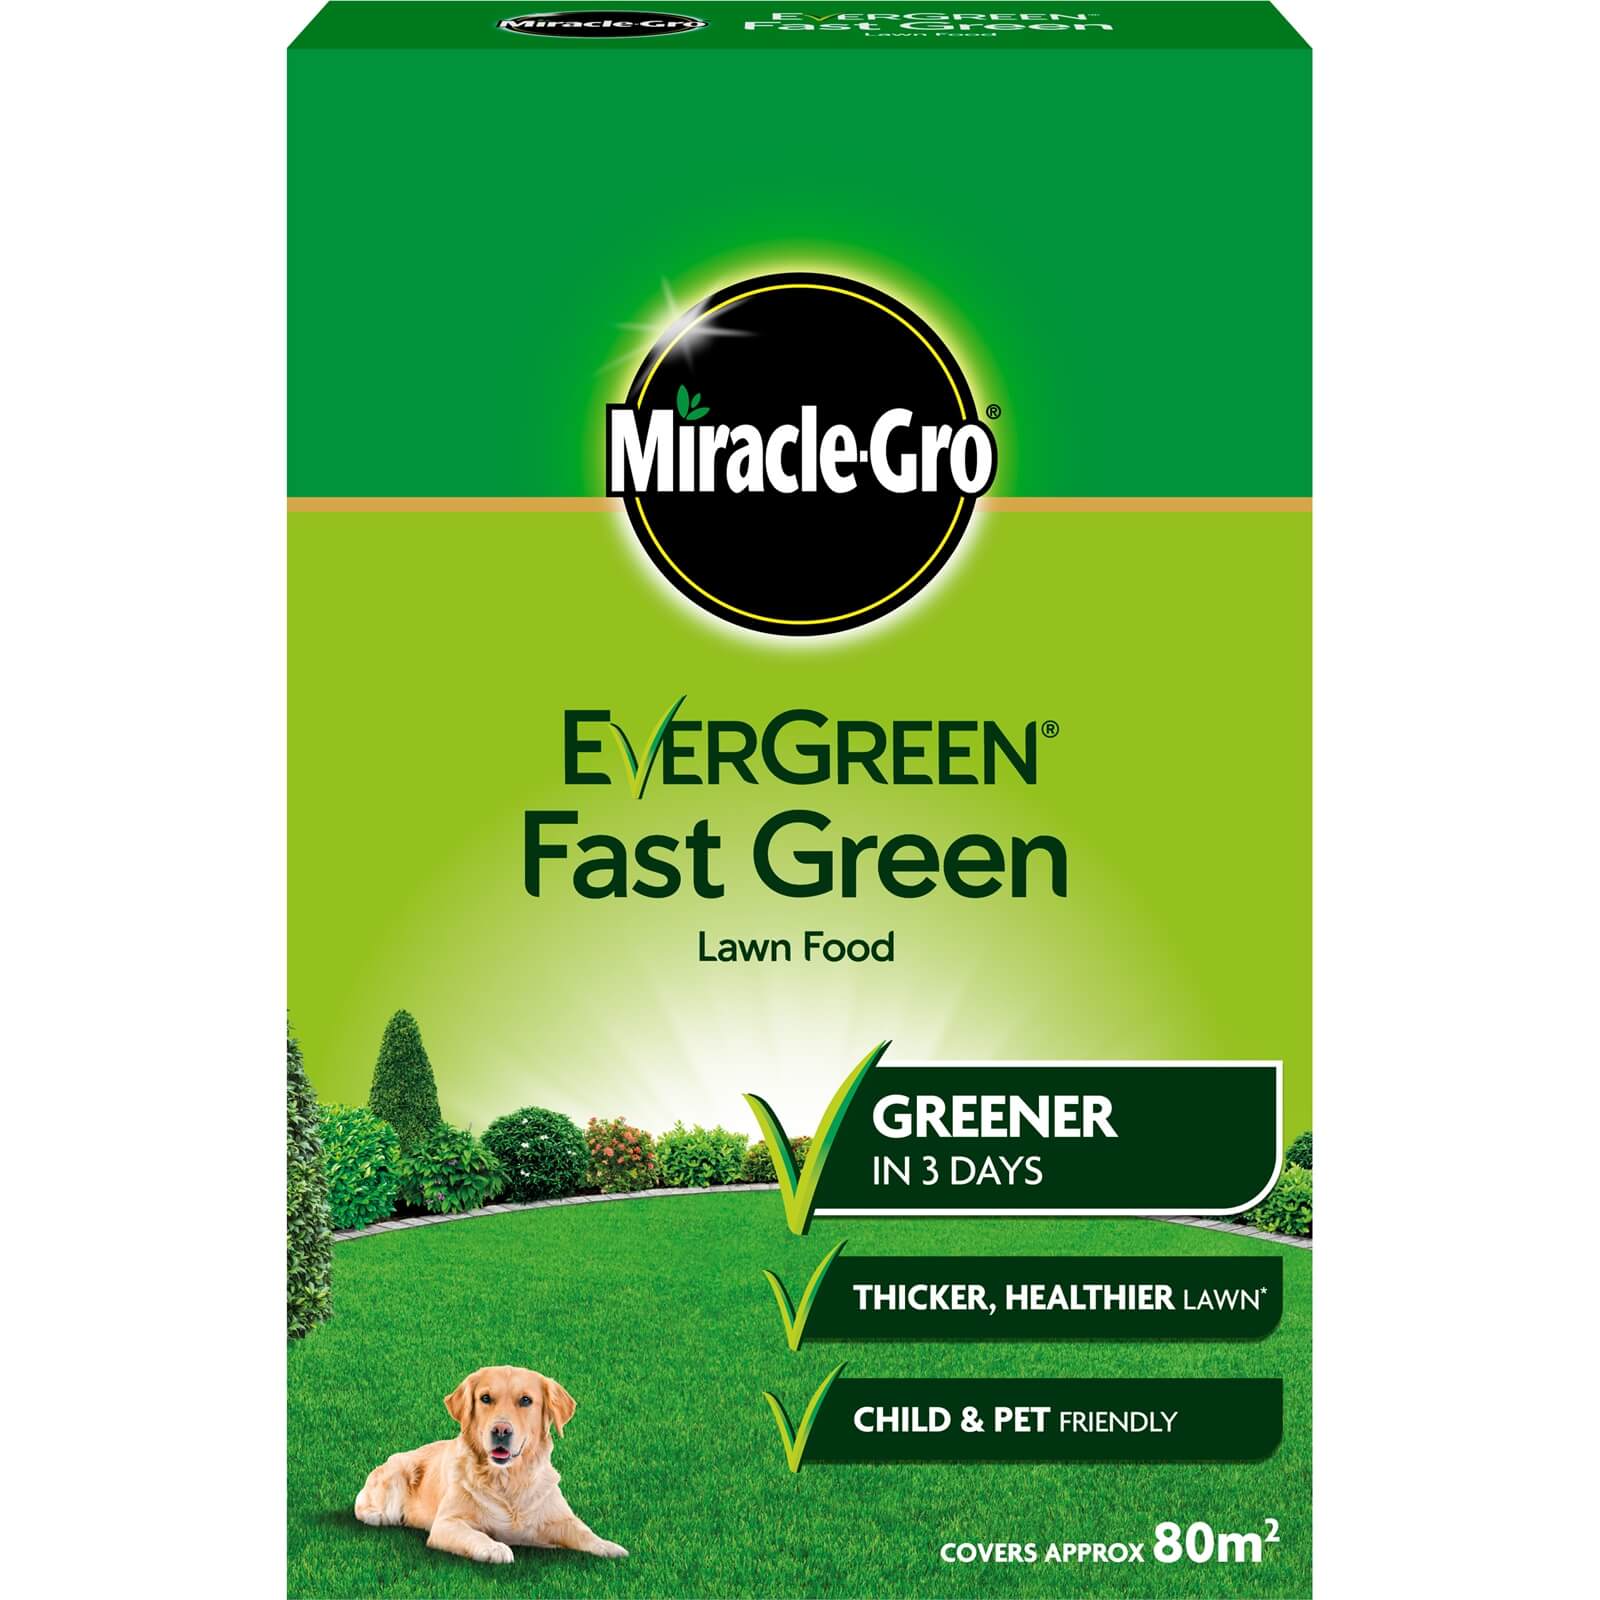 Miracle-Gro Evergreen Fast Green Lawn Food - 80m²